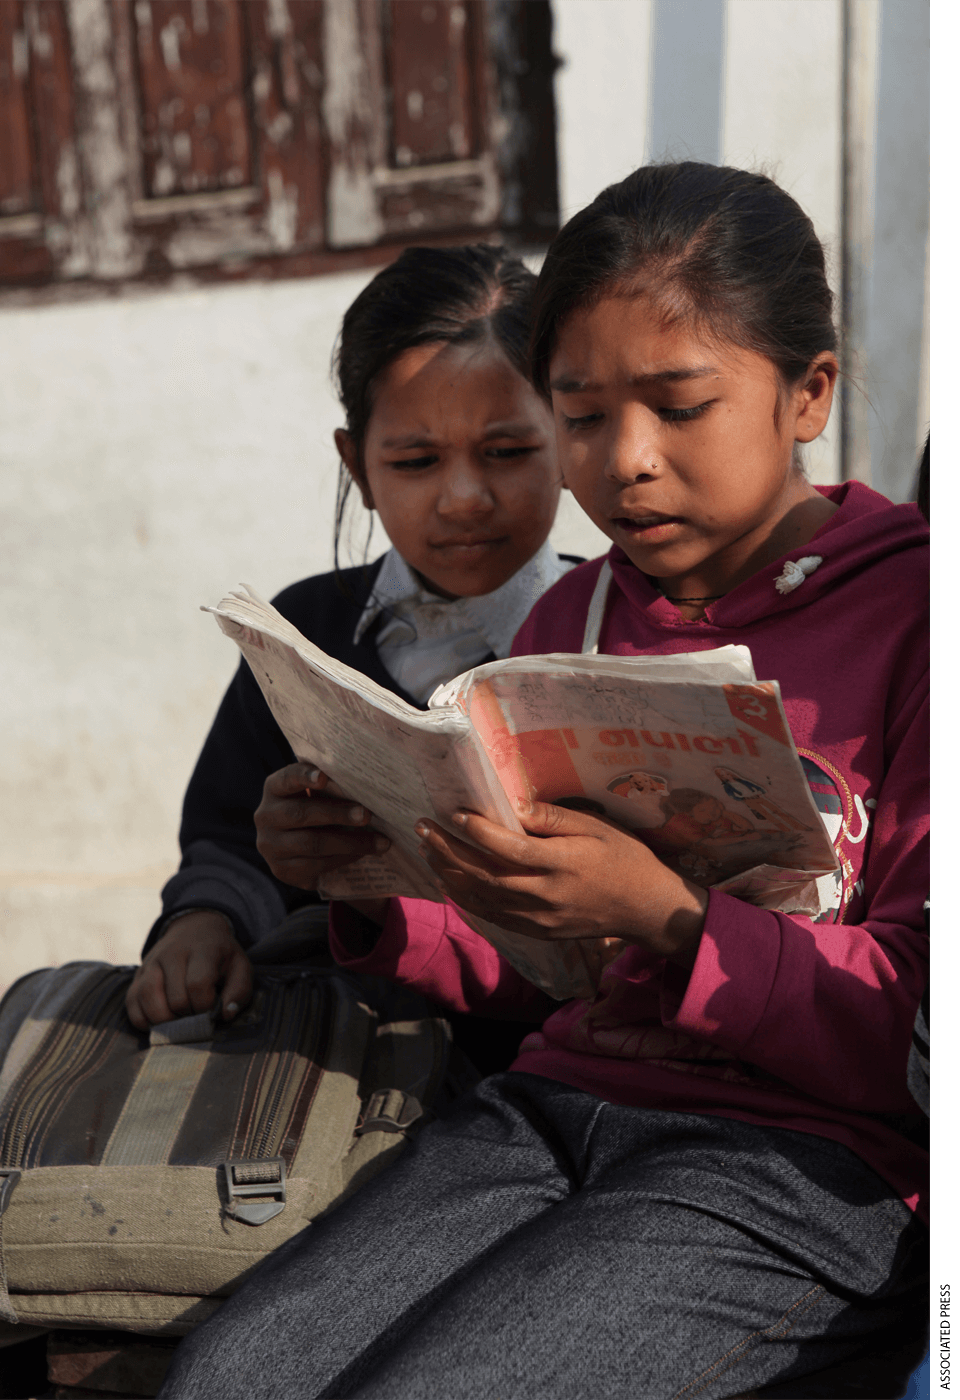 Two young schoolgirls read a Nepali textbook during recess outside their classroom in Kathmandu, Nepal.